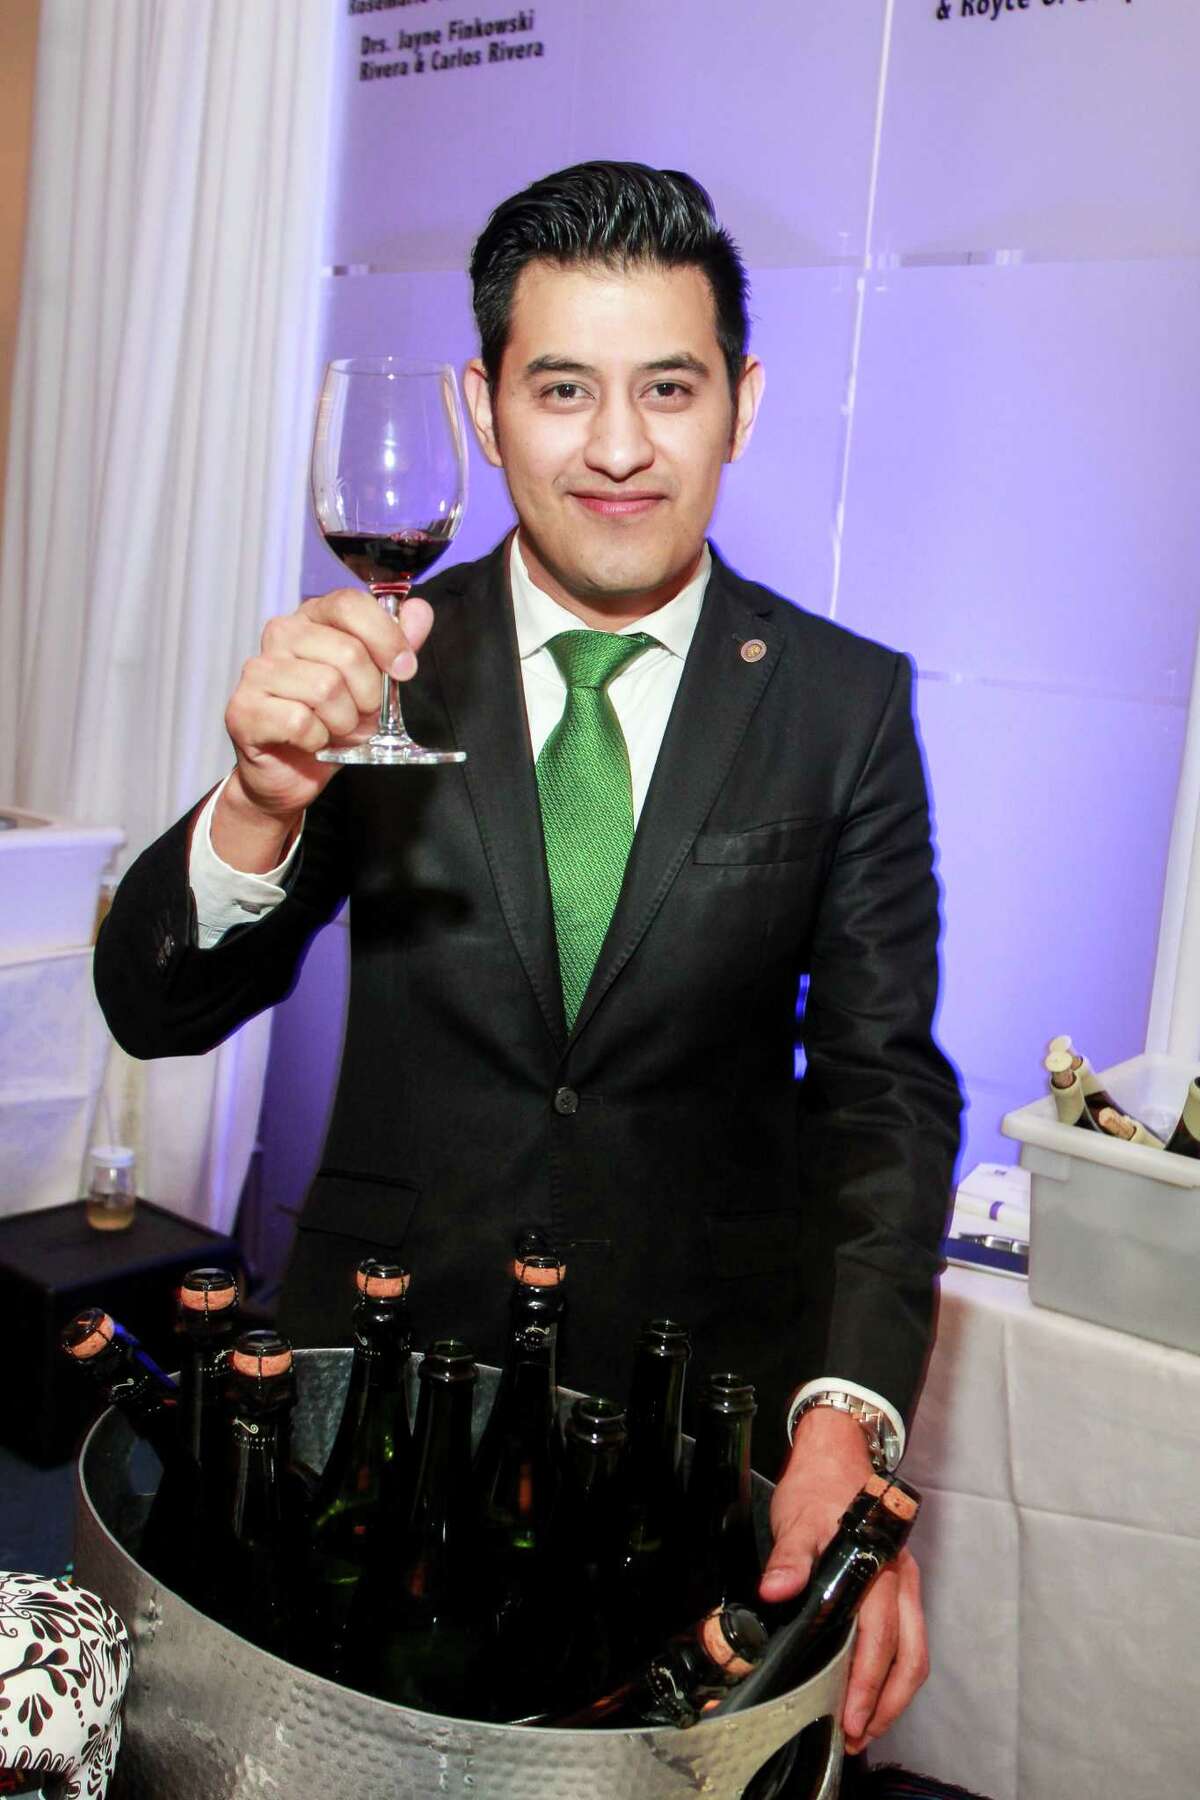 Sommelier Andres Blanco of Caracol was victorious at the Iron Sommelier event at the Houstonian.